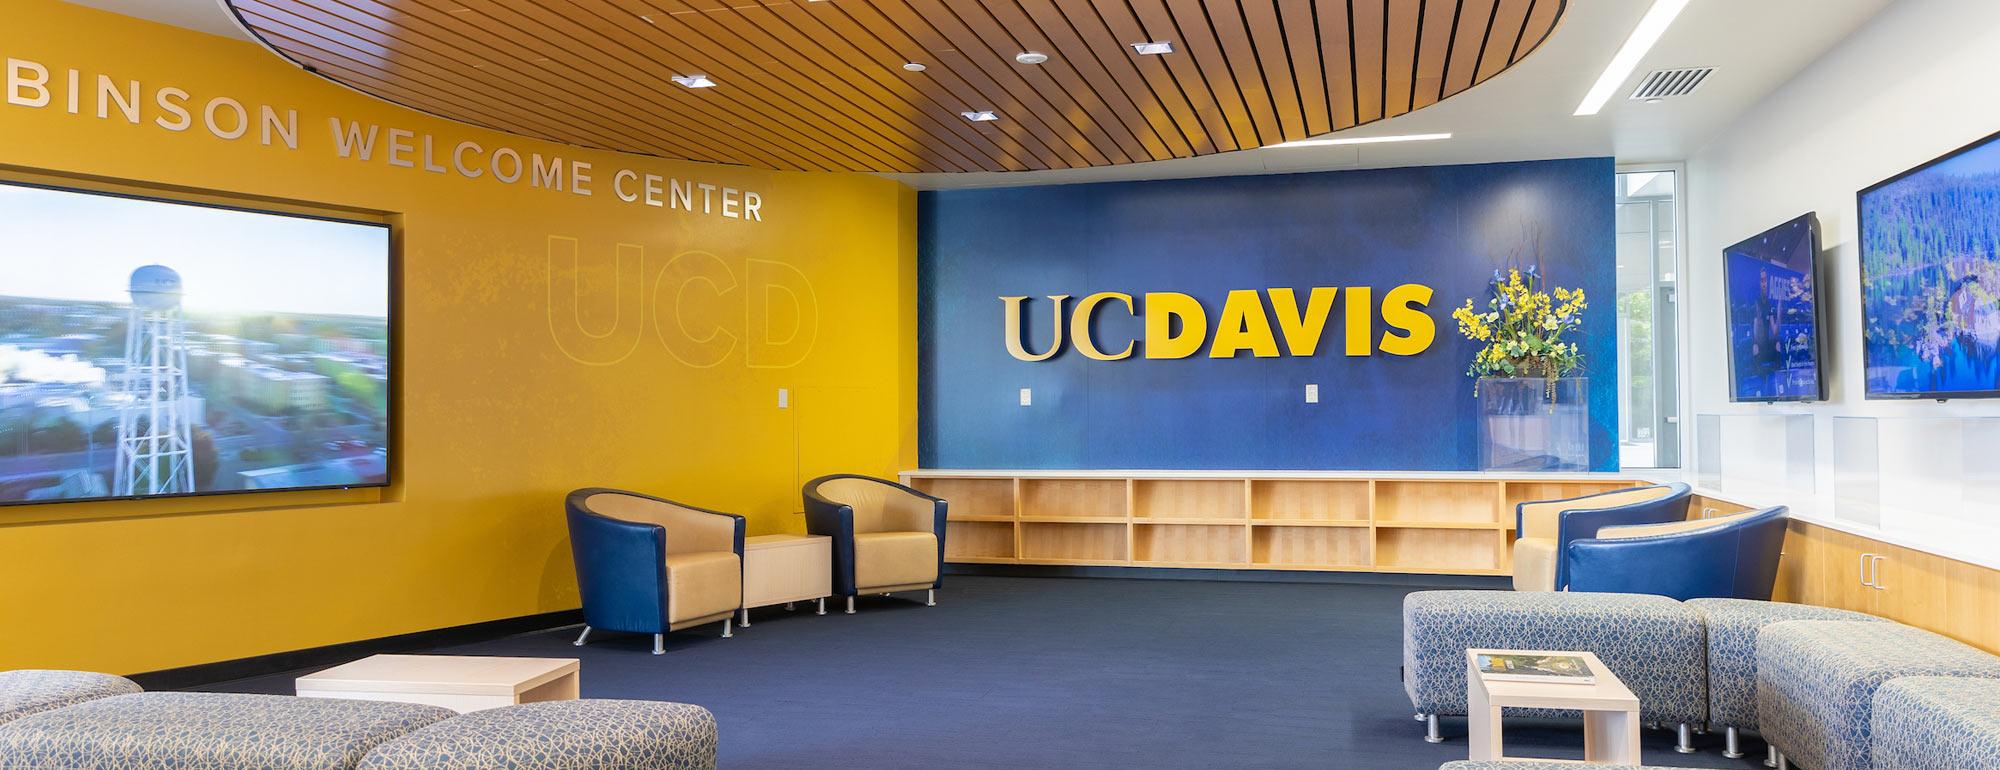 Interior shot of the Walter A. Robinson Welcome Center at UC Davis